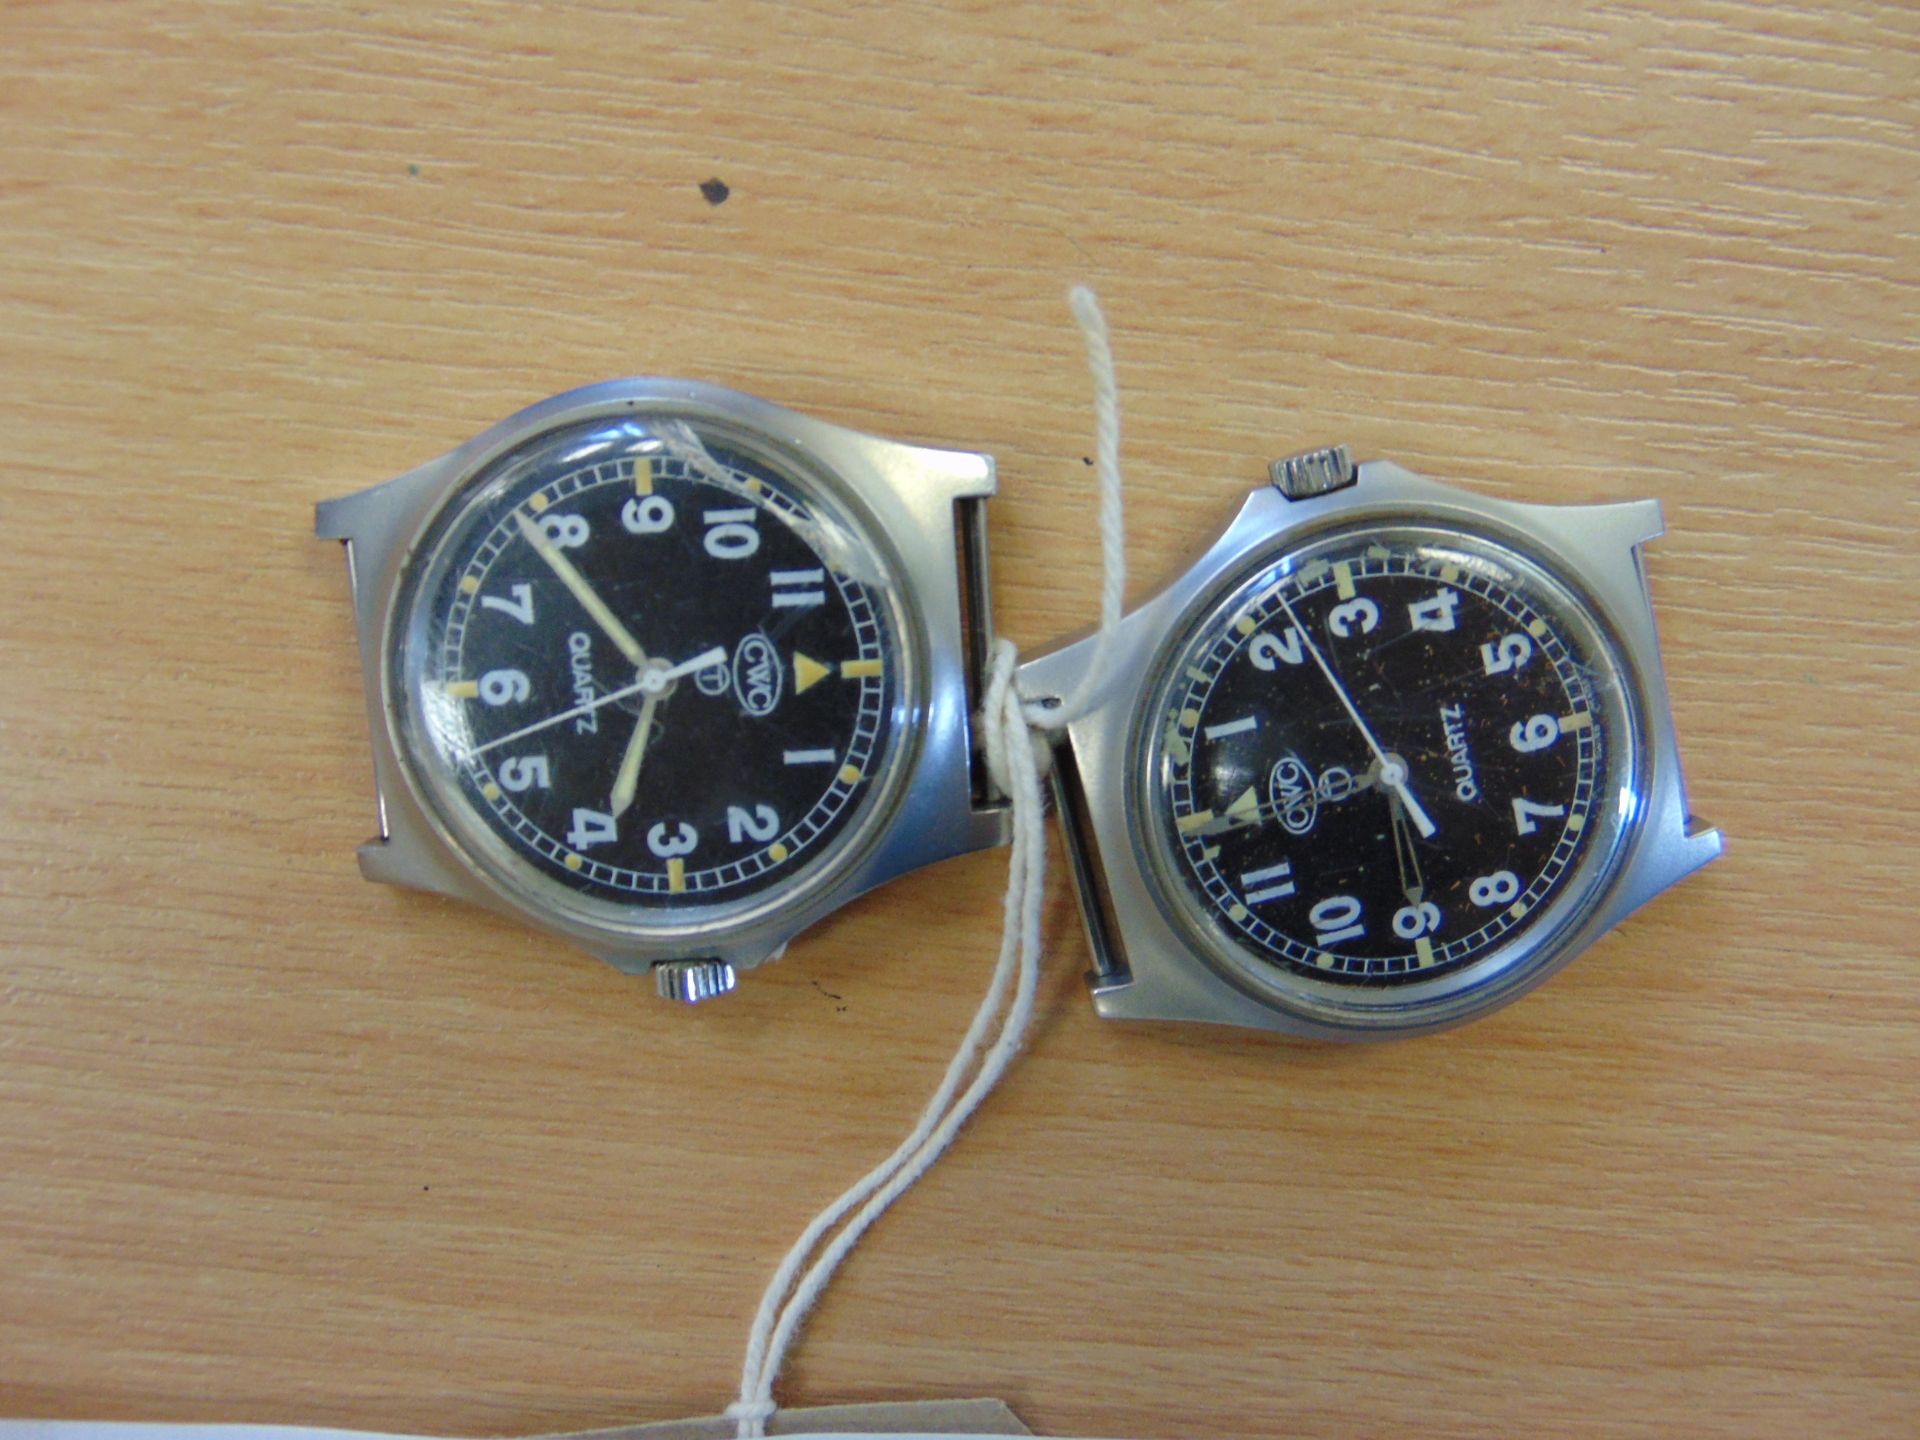 2x CWC W10 WATCHES DATED 2005 & 2006 WATER RESISTANT TO 5 ATM